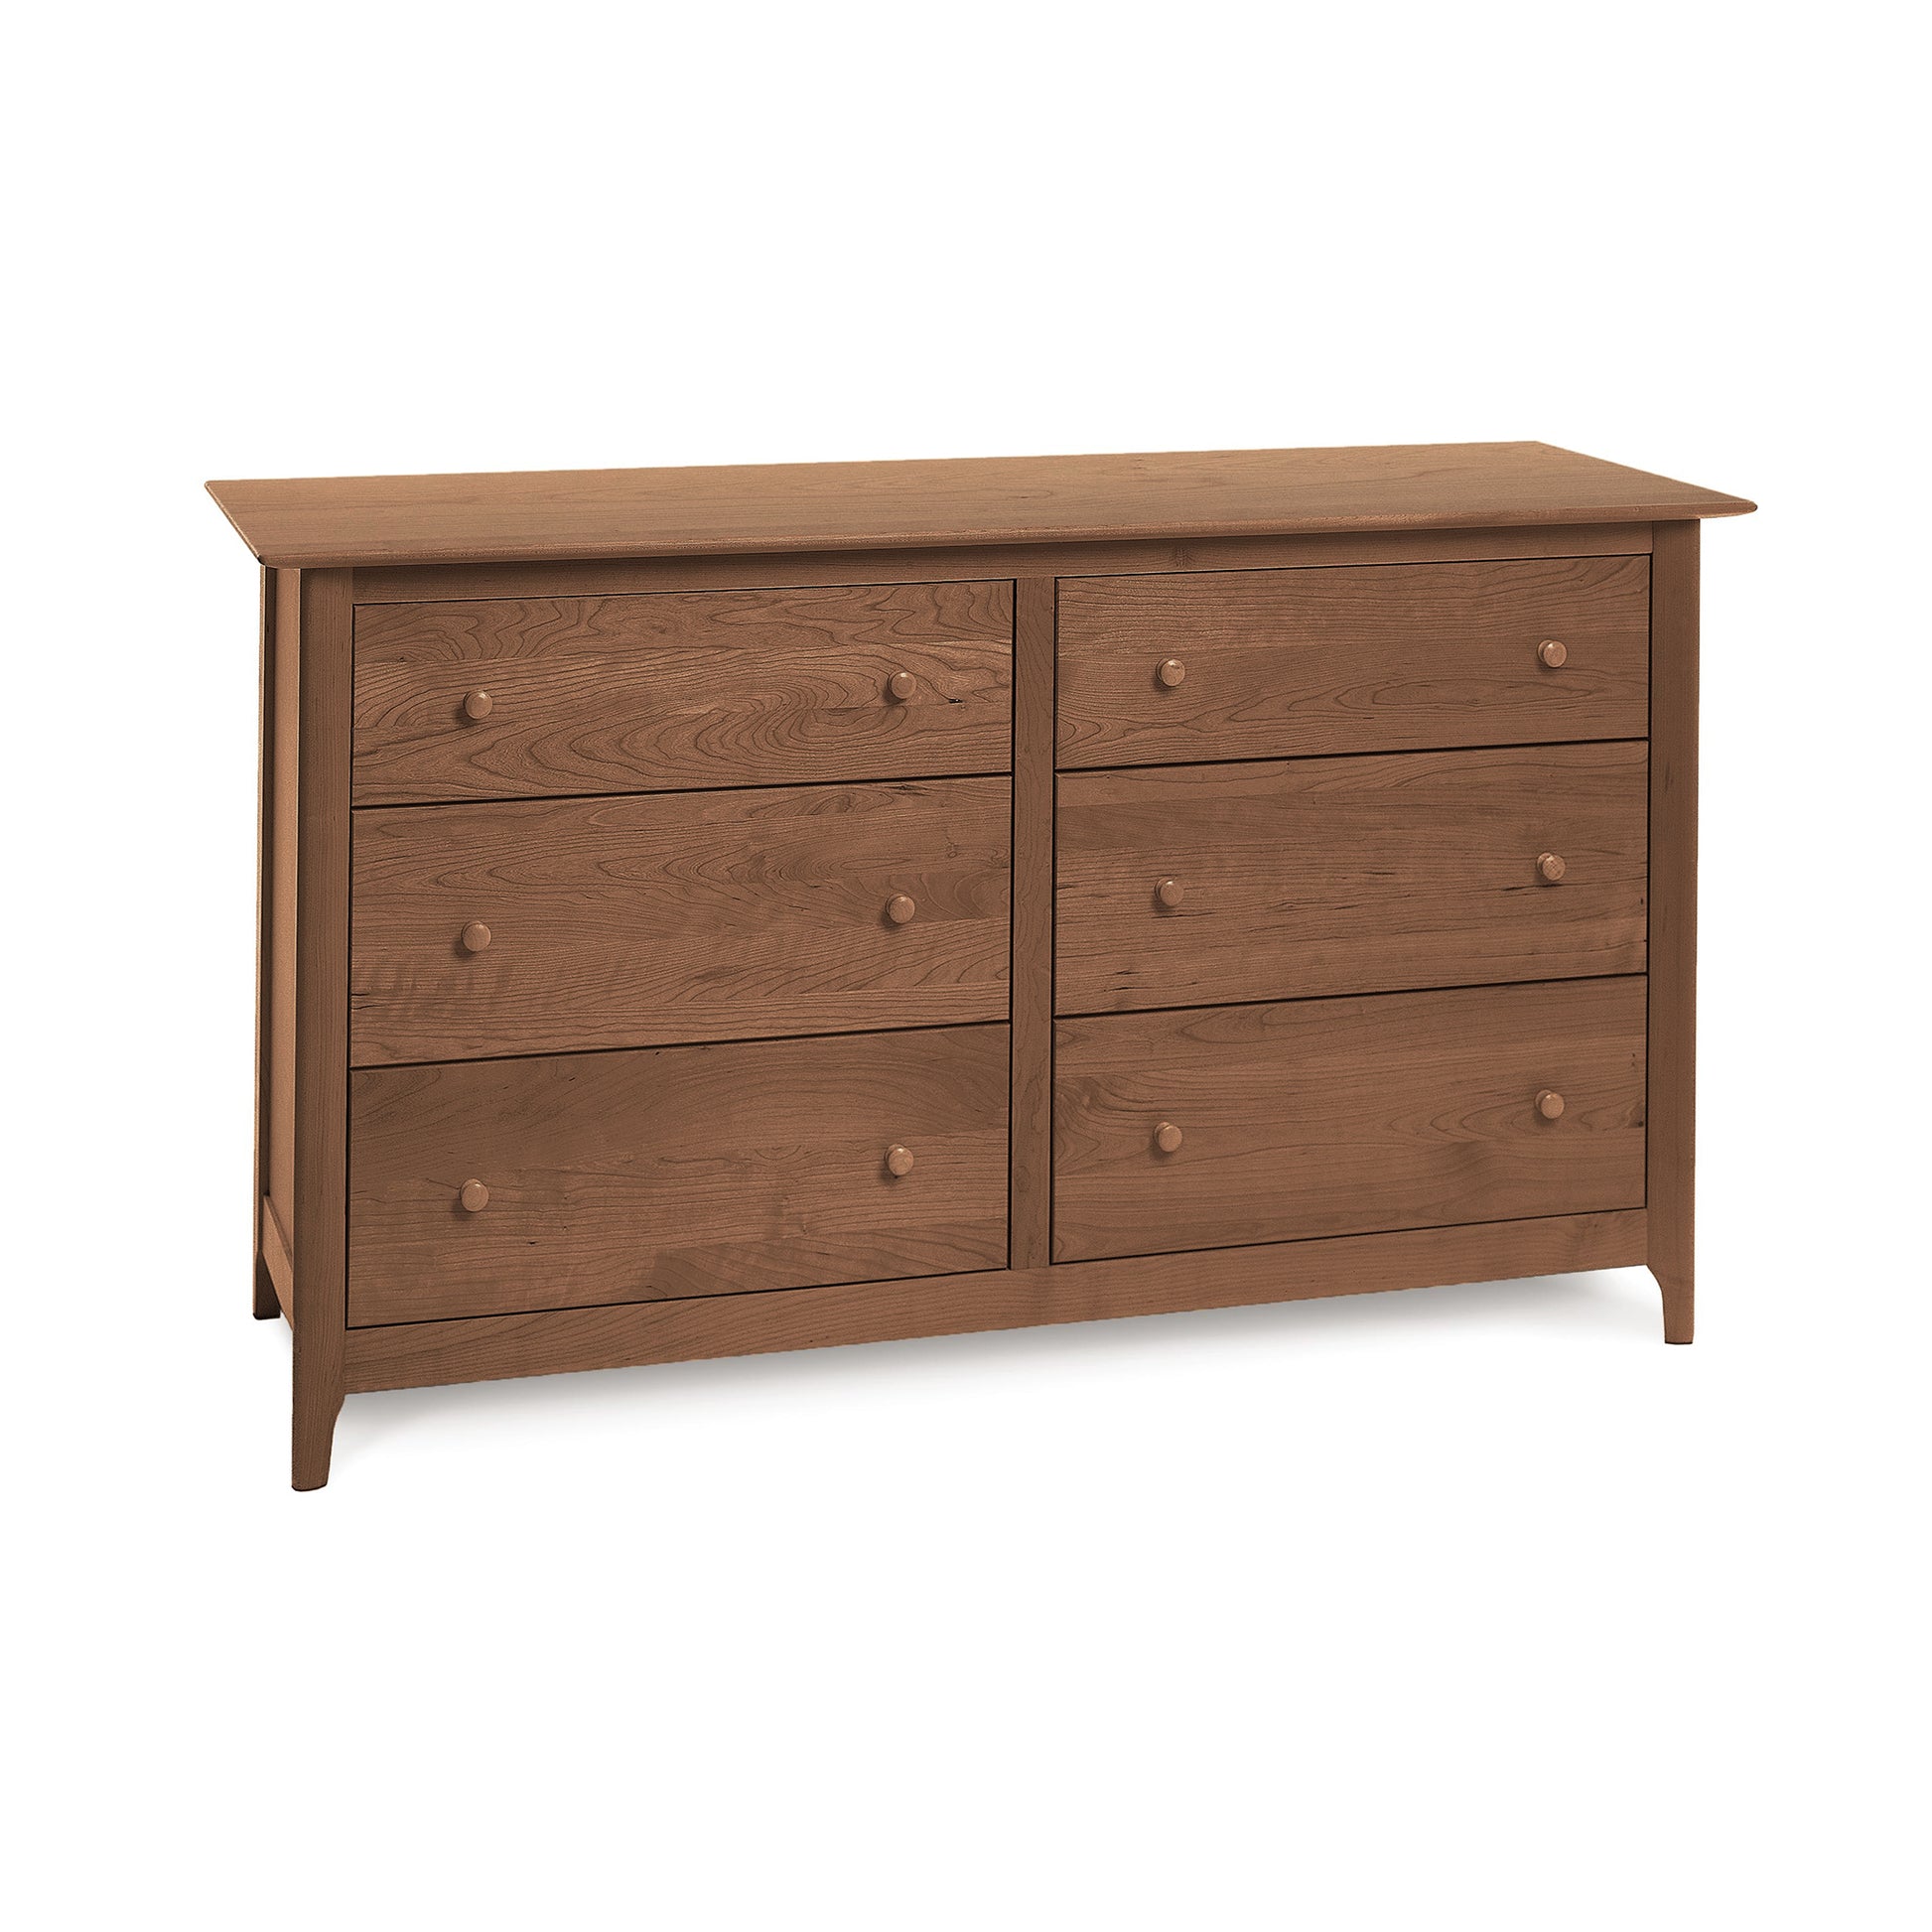 An eco-friendly wooden Sarah 6-Drawer Dresser from Copeland Furniture on a plain background.